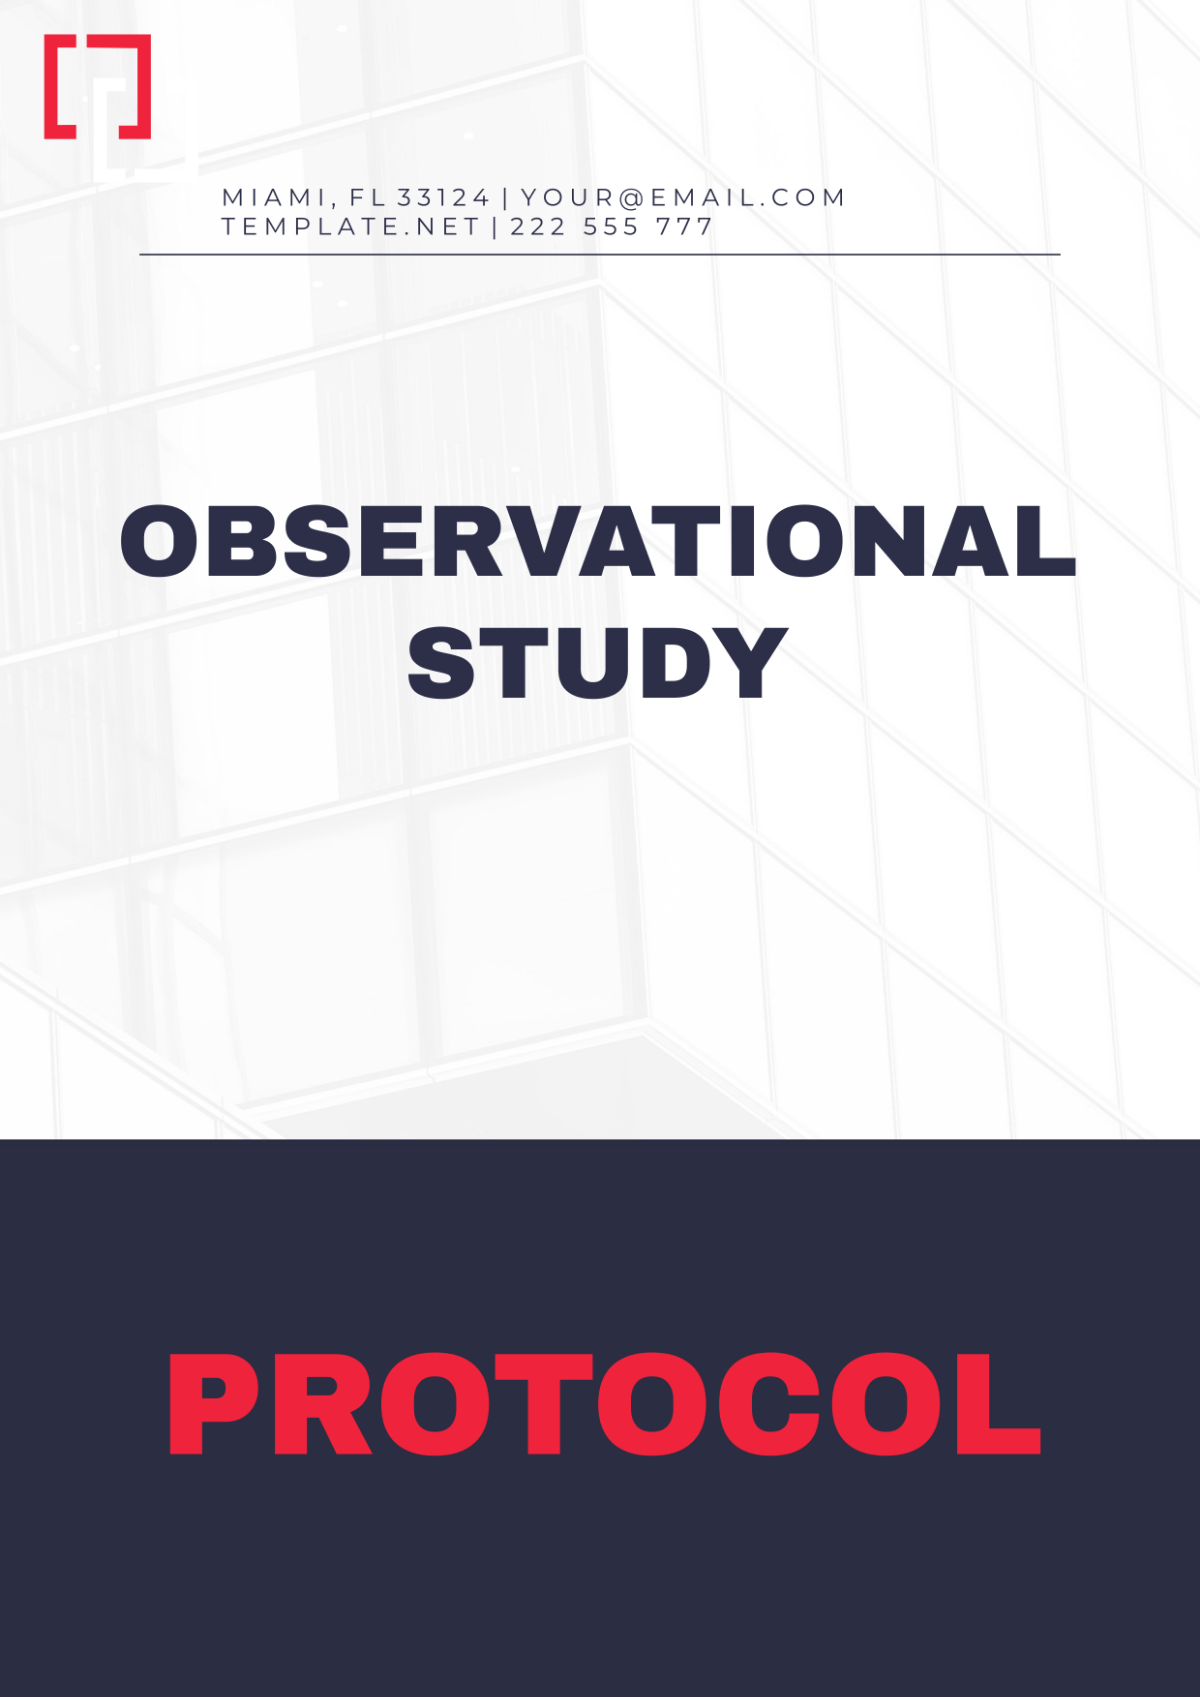 Free Observational Study Protocol Template